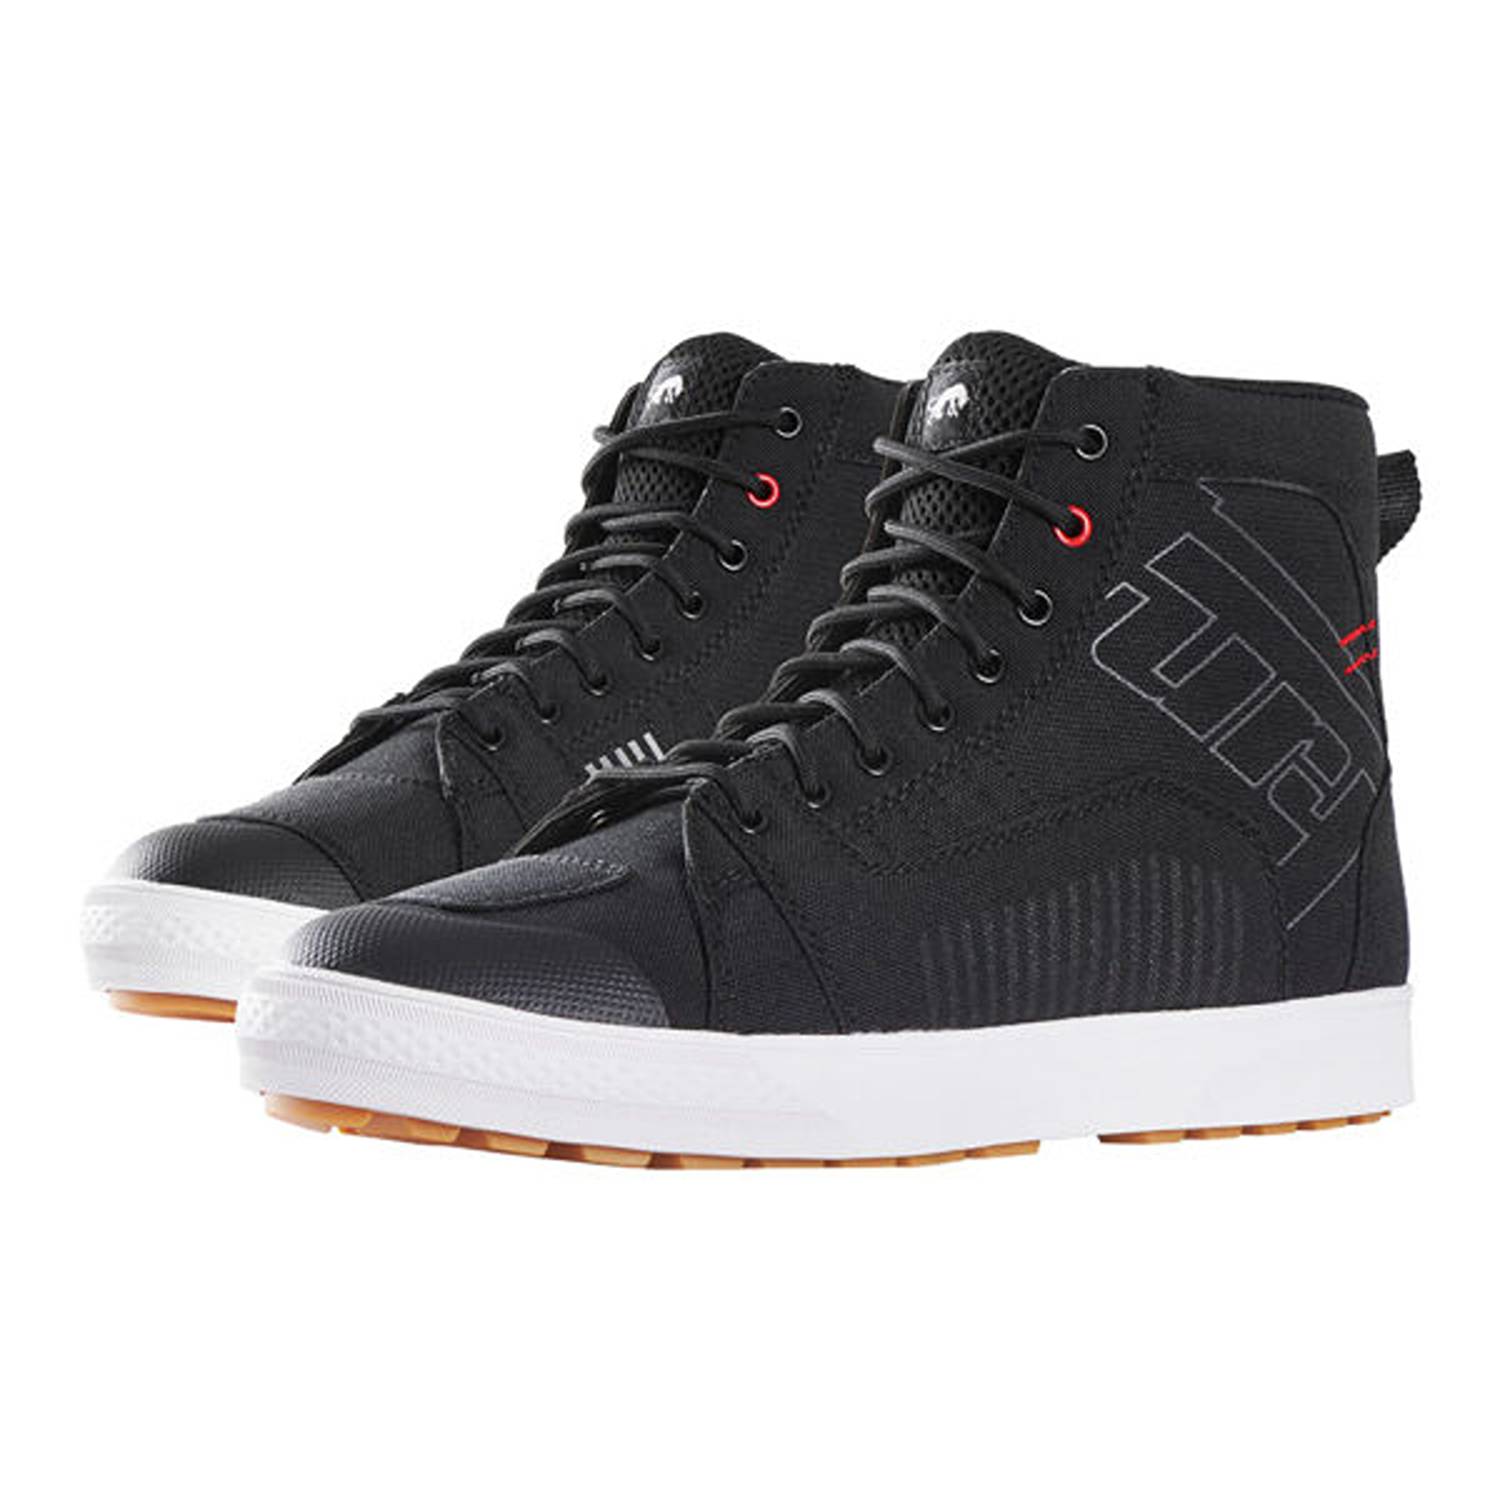 Image of EU Furygan Stockton Air D30 Shoes Black Red Taille 41